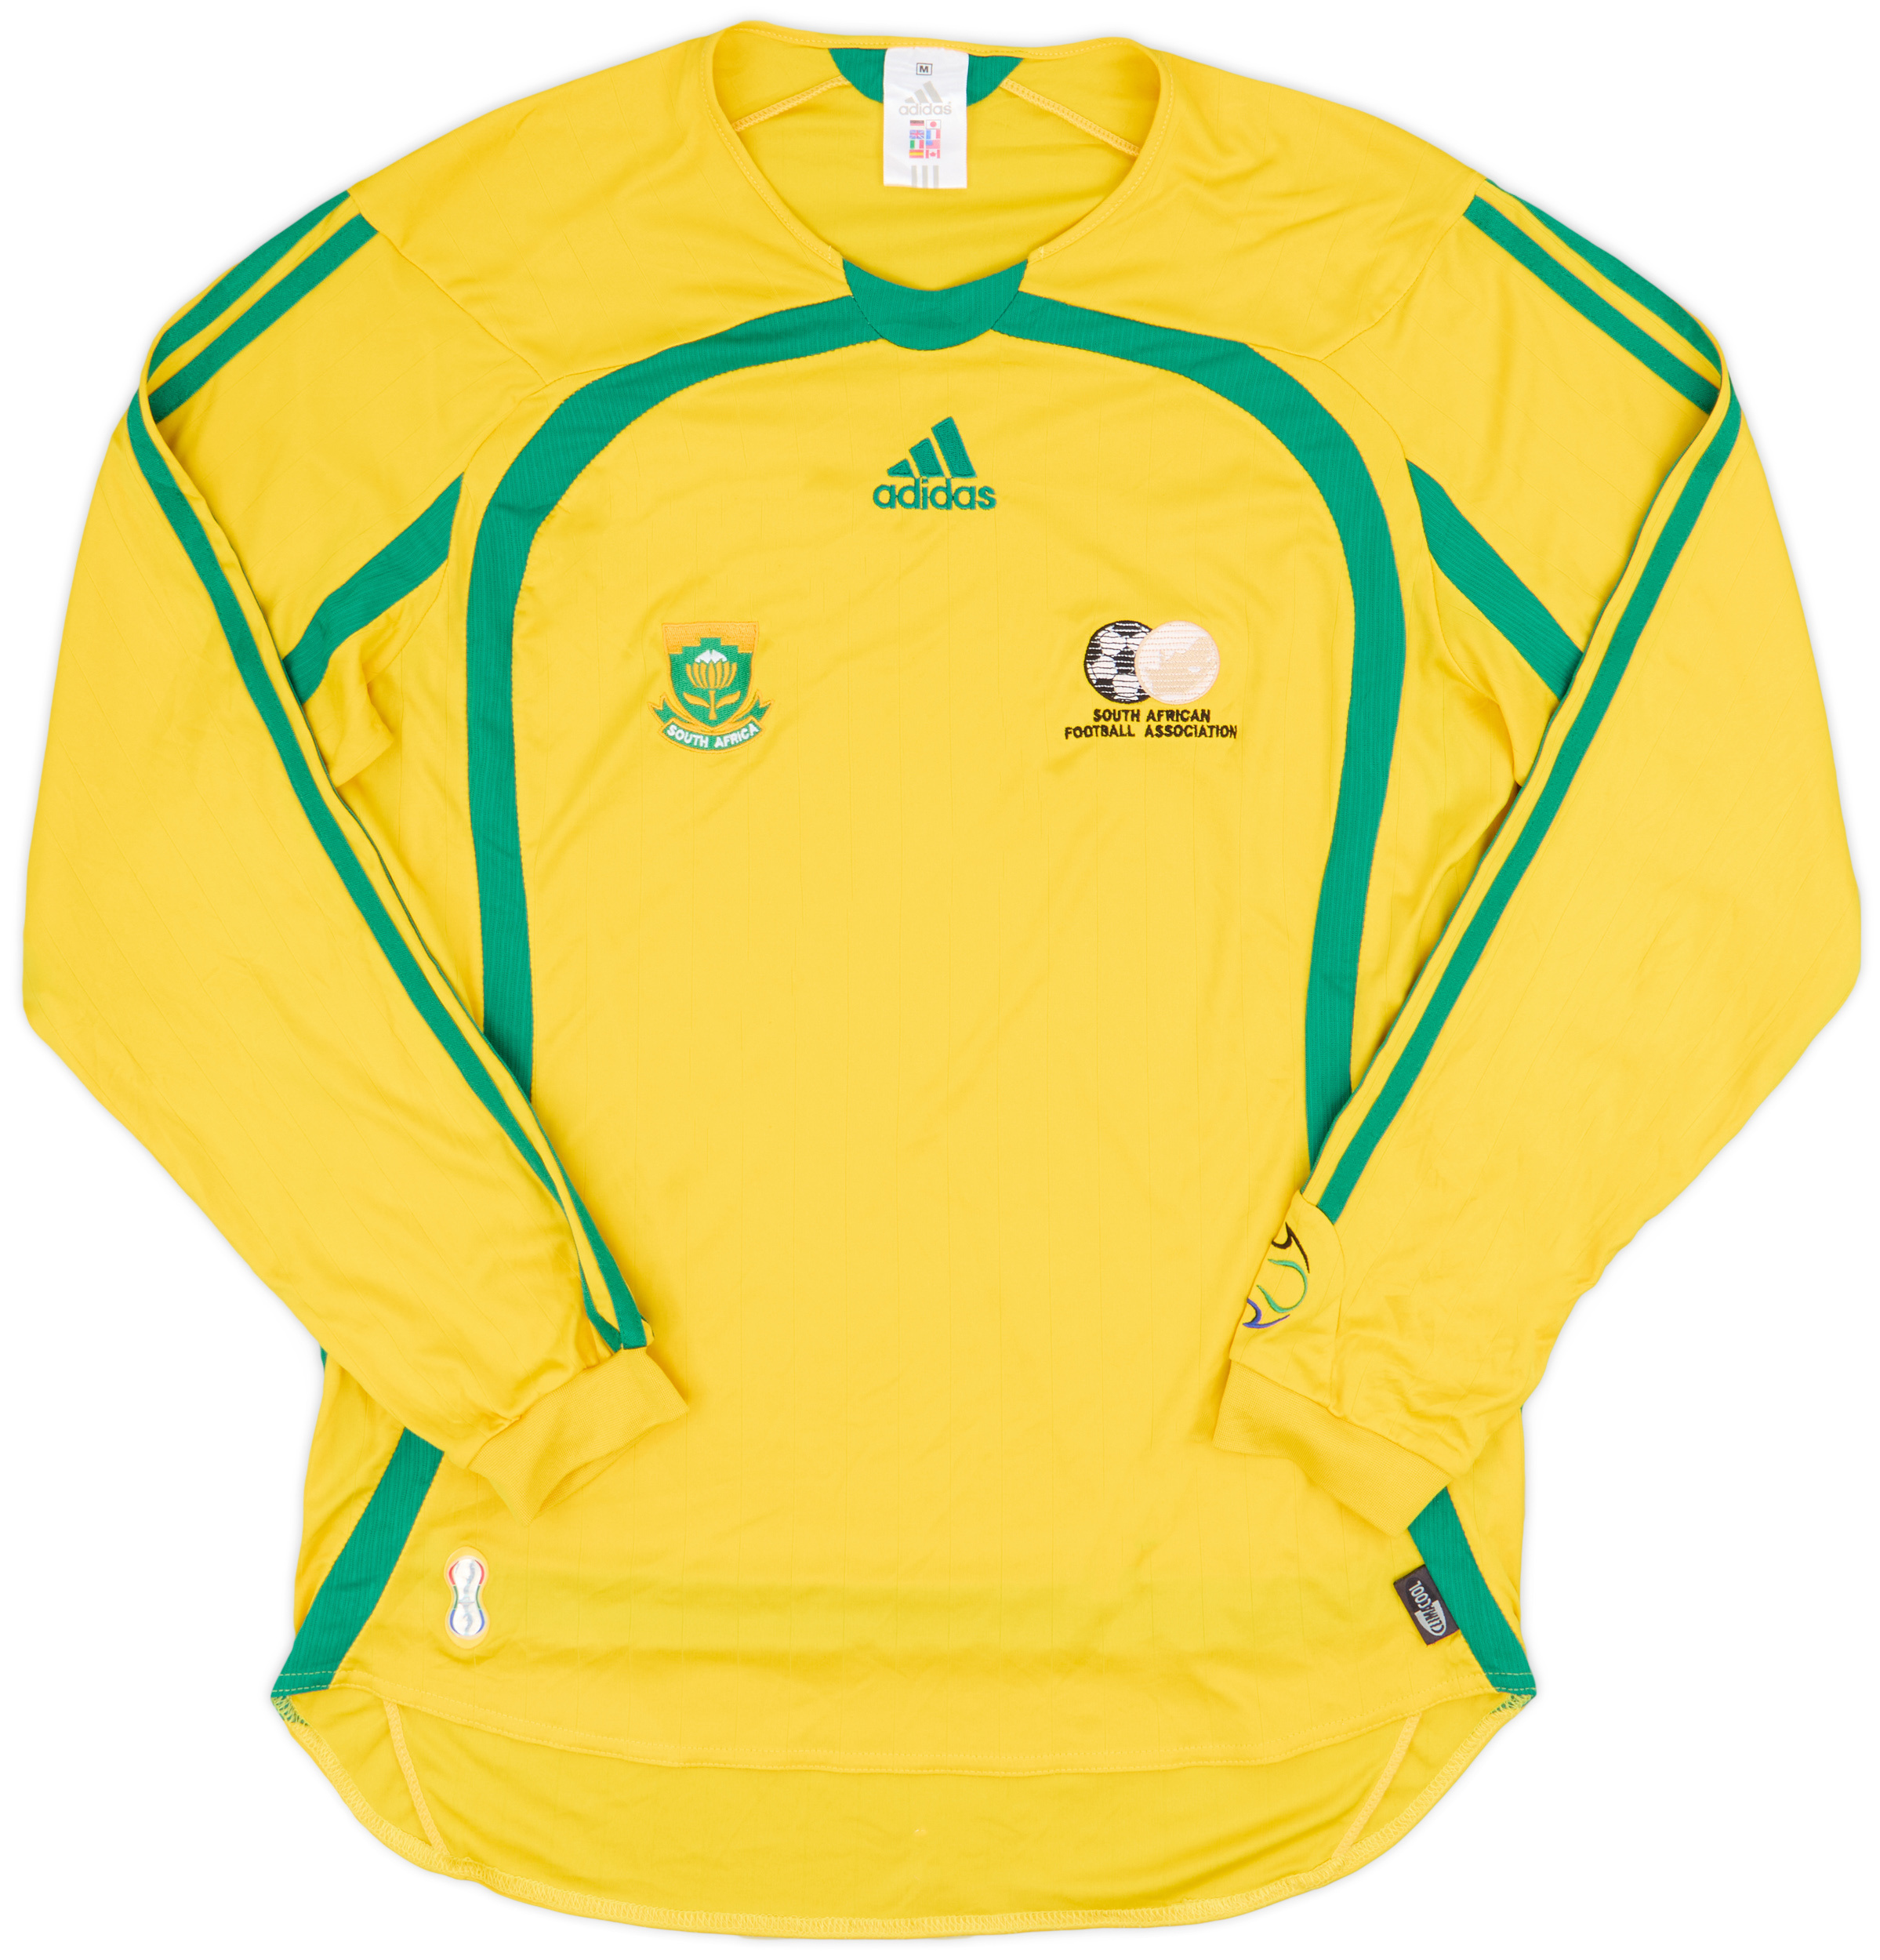 2006-09 South Africa Home Shirt - 9/10 - ()